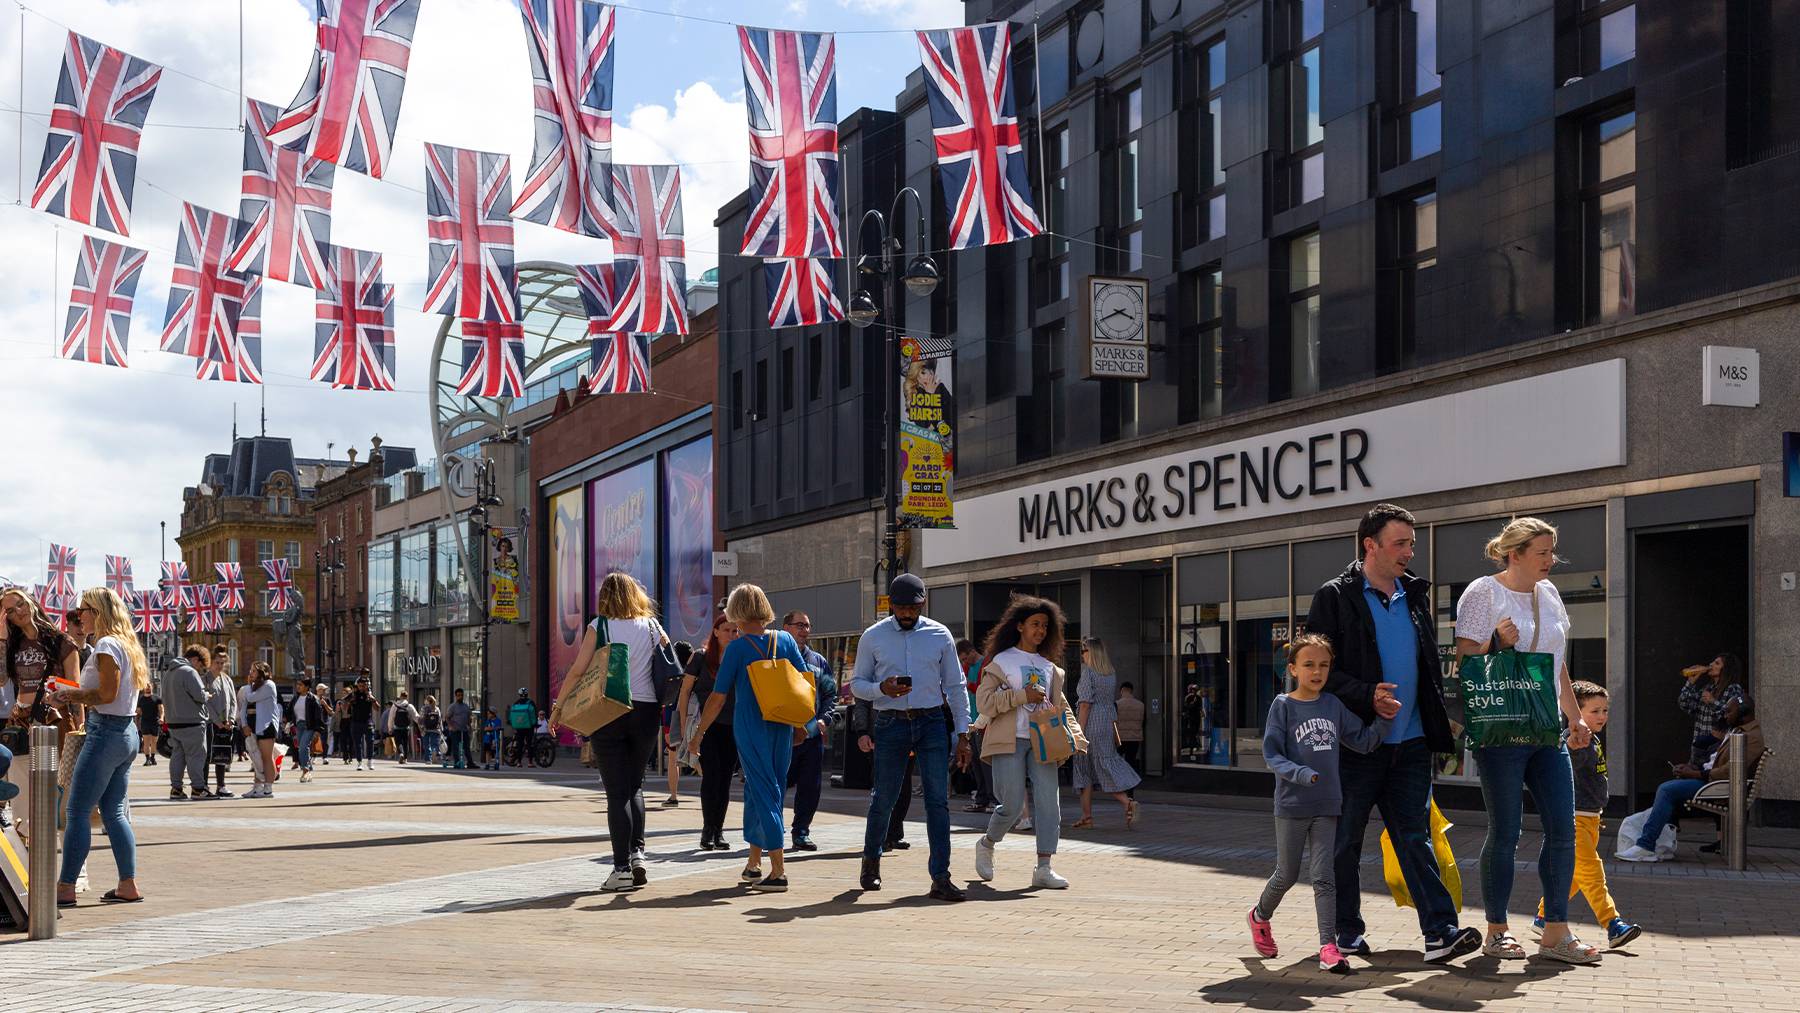 British highstreet with shoppers and union jack flags.